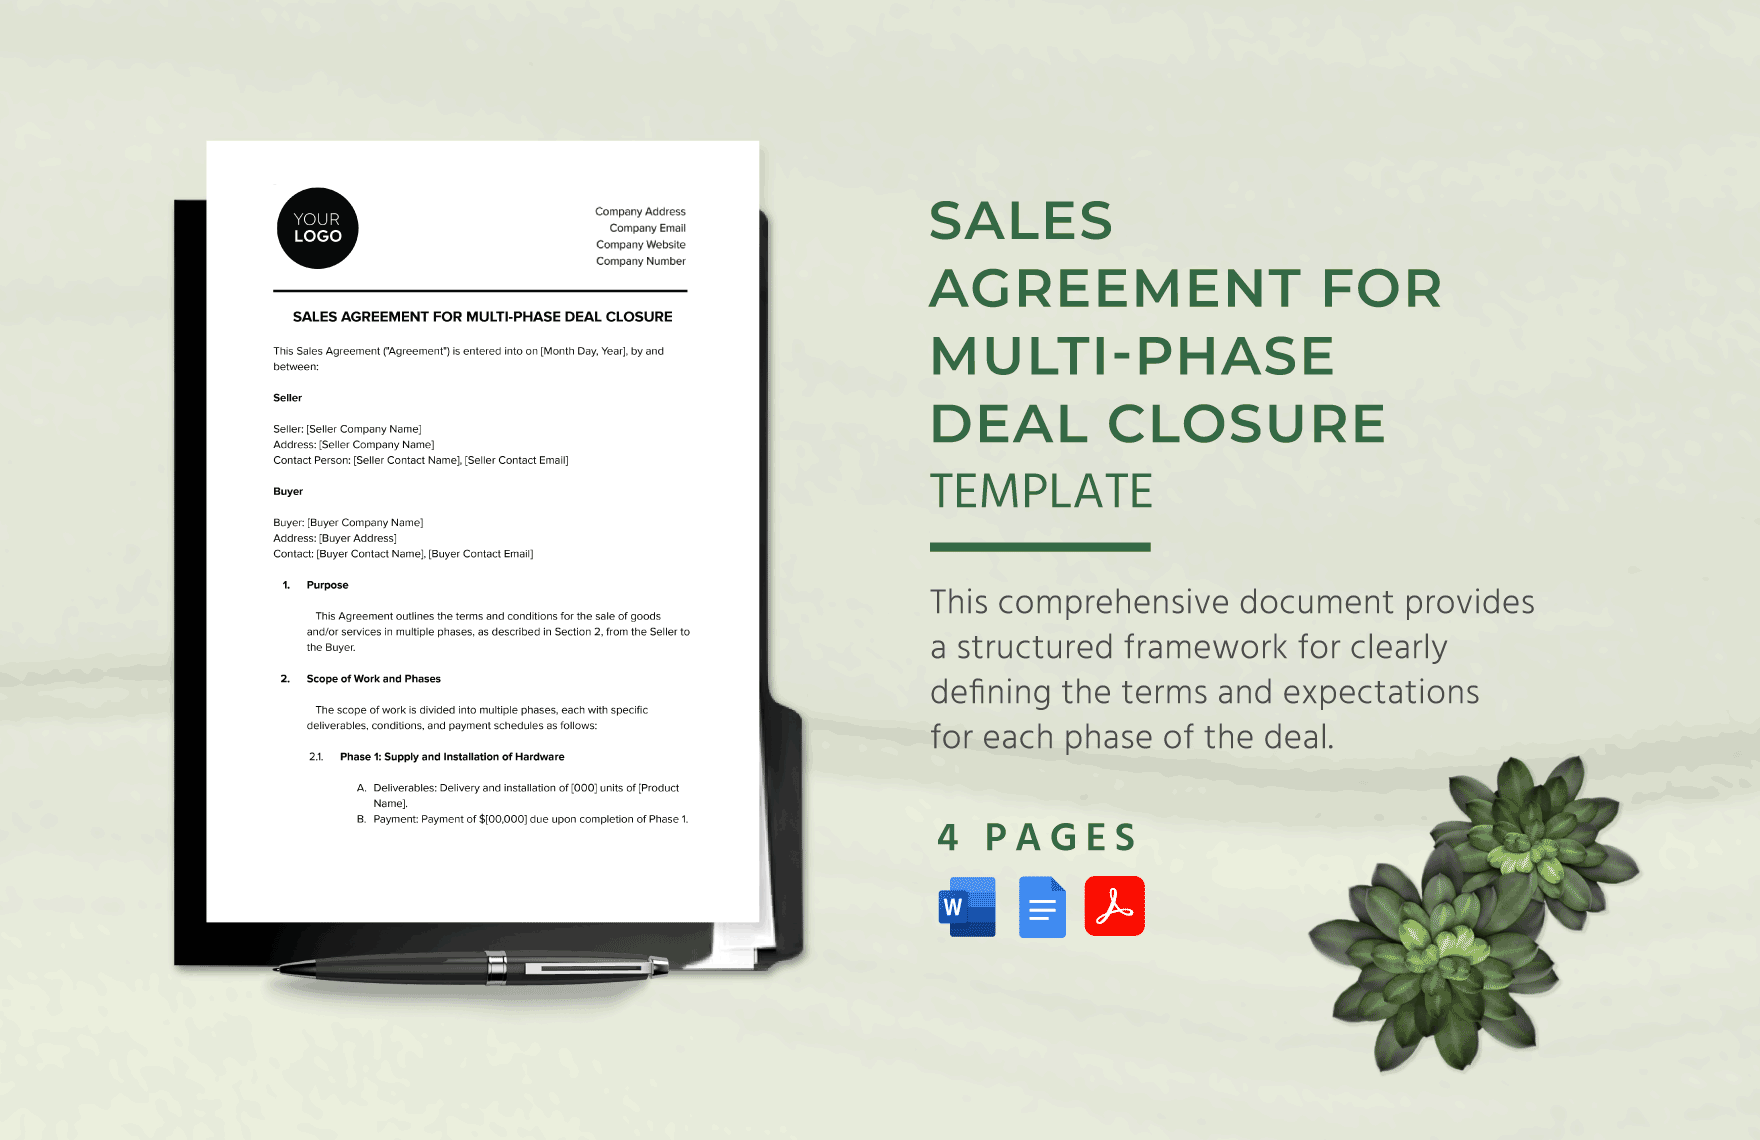 Sales Agreement for Multi-Phase Deal Closure Template